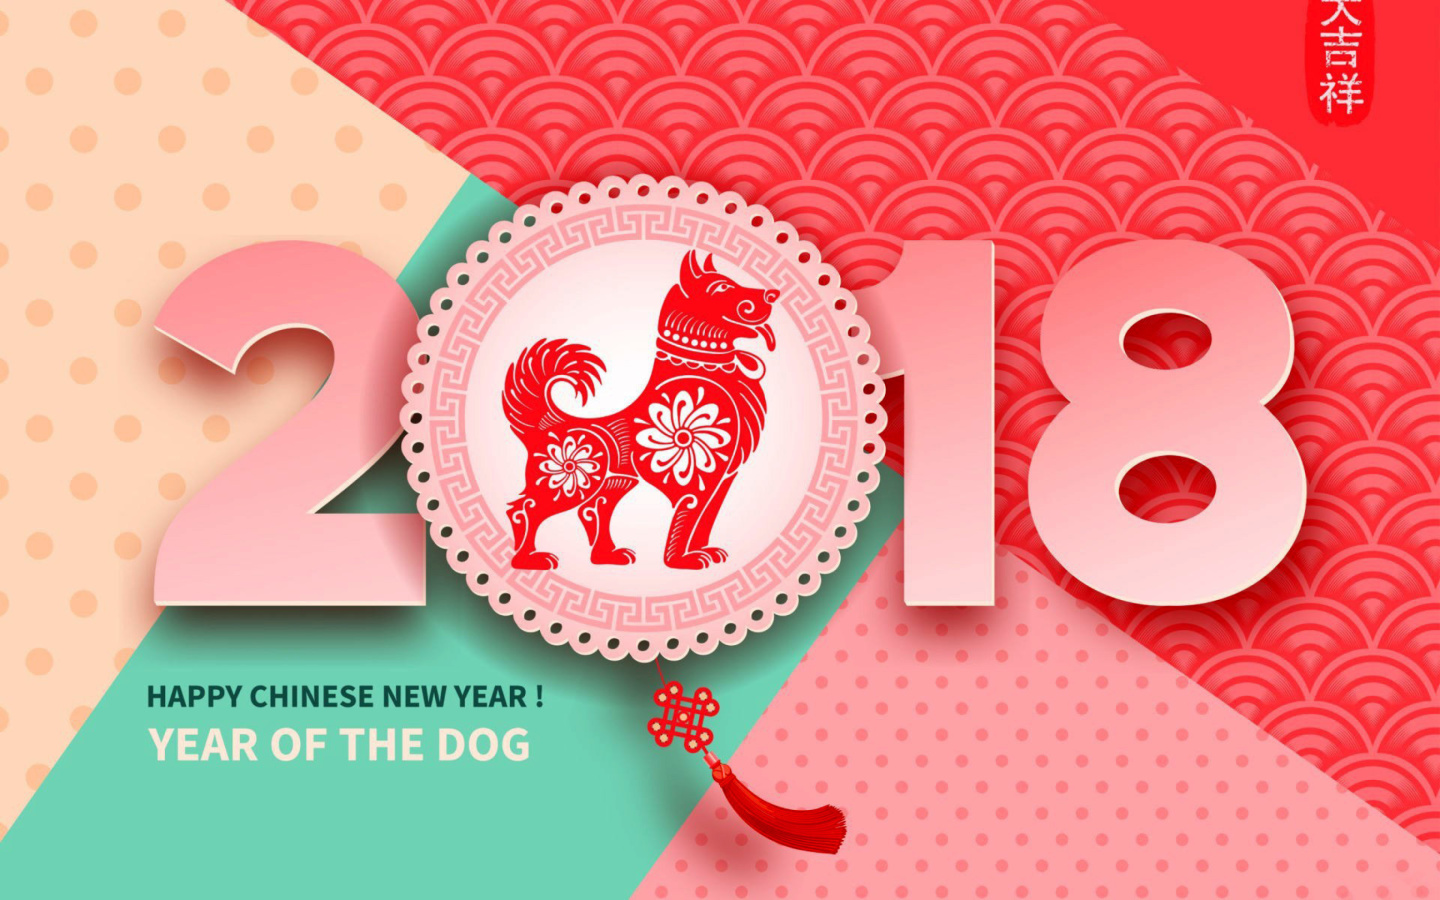 Das 2018 New Year Chinese year of the Dog Wallpaper 1440x900